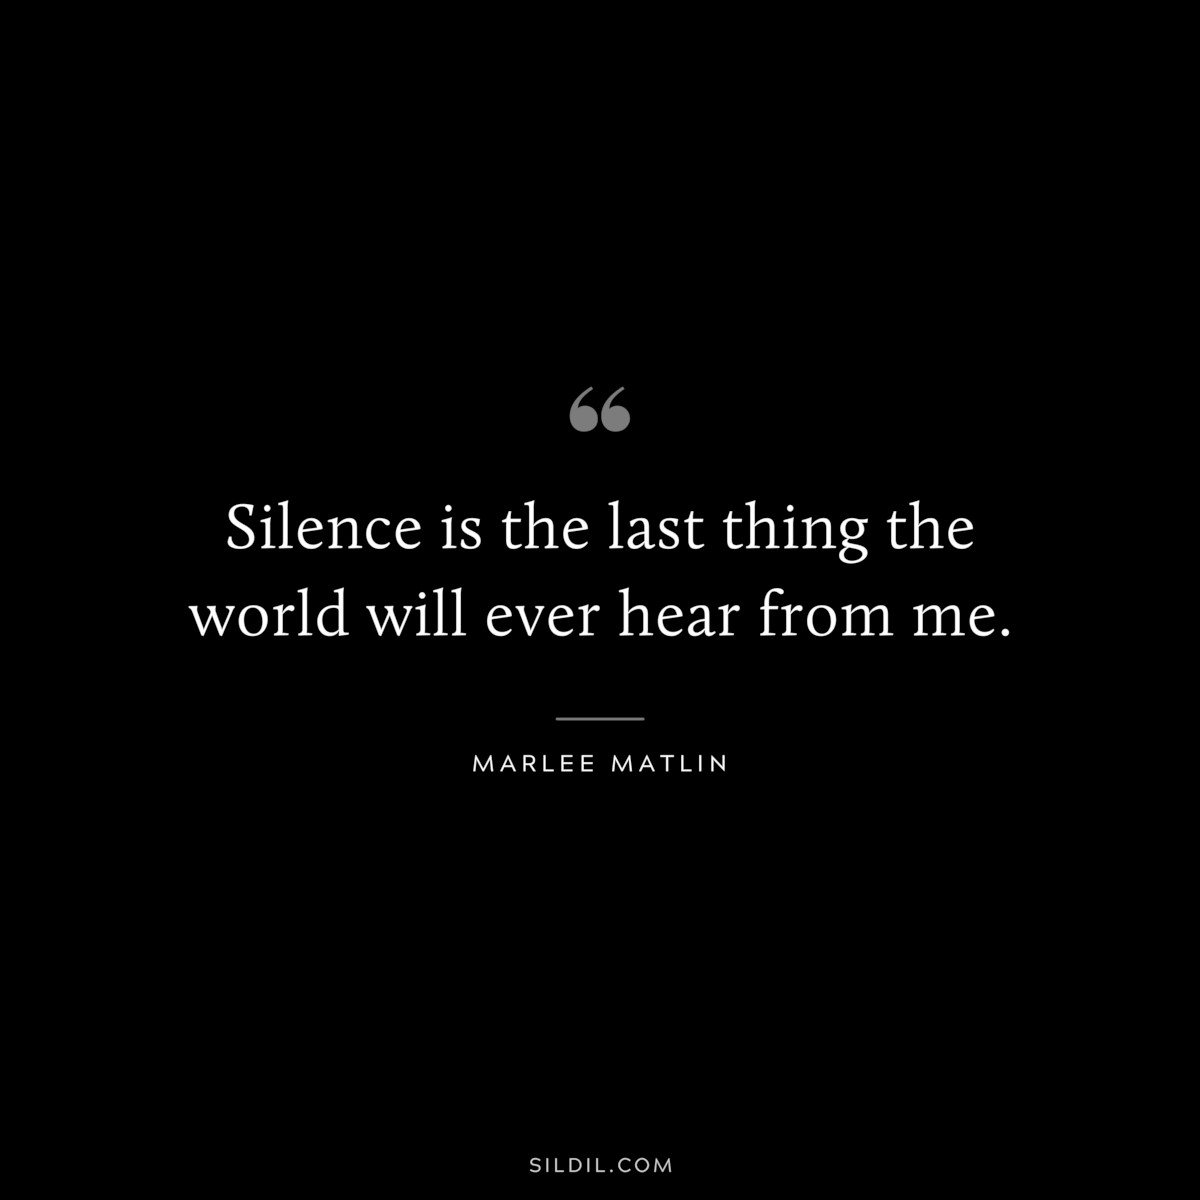 Silence is the last thing the world will ever hear from me. ― Marlee Matlin